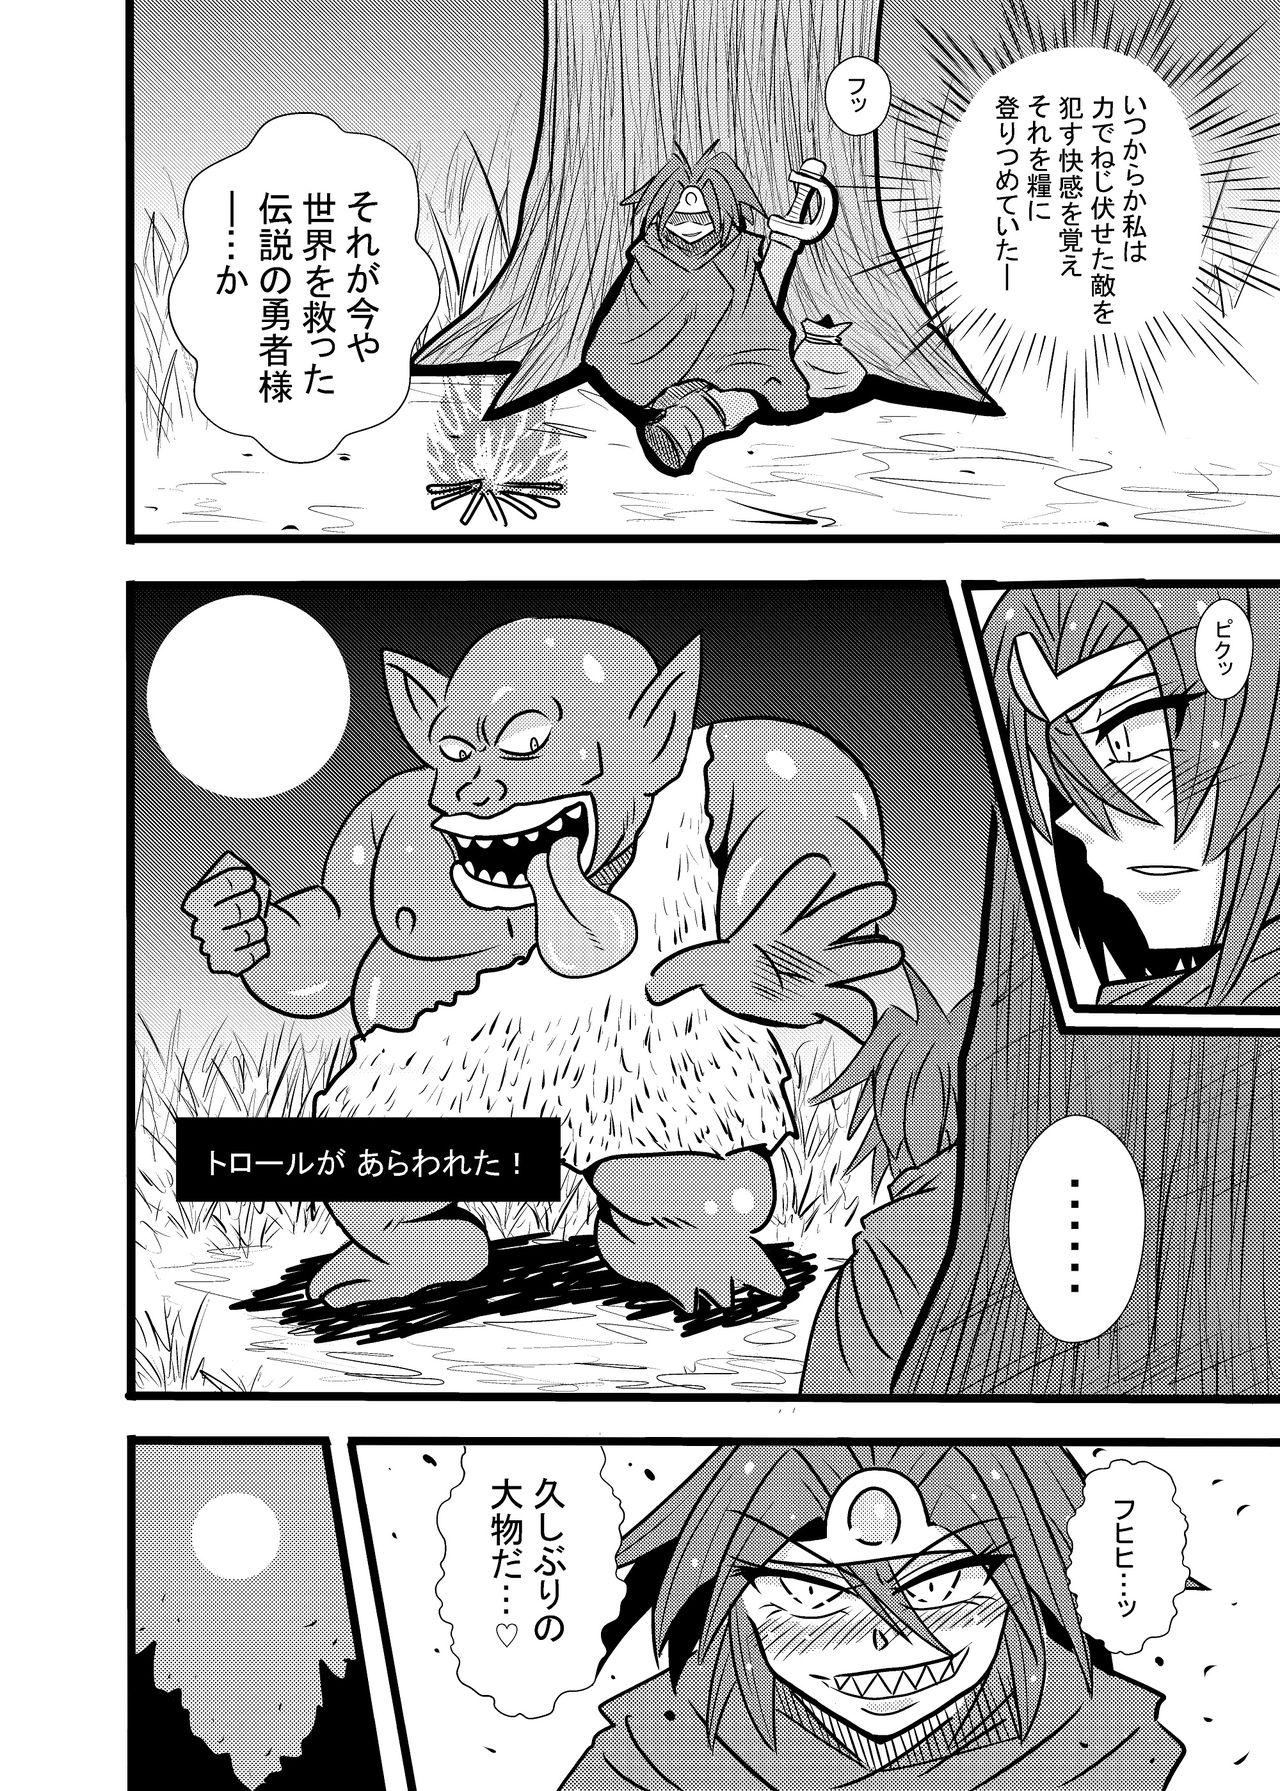 Gay 3some Yuusha Smile!? - Dragon quest iii Public - Page 7